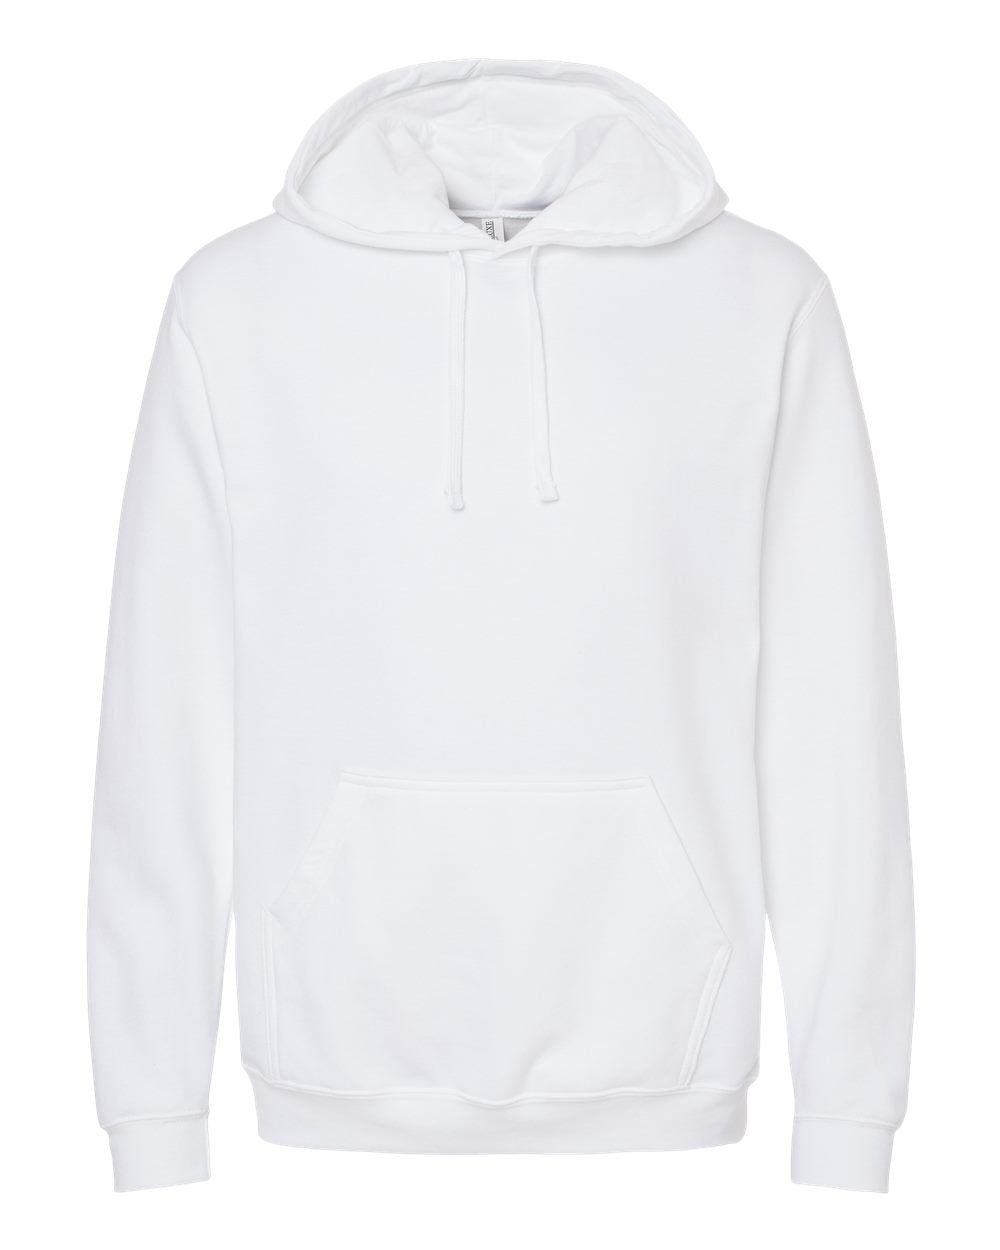 Unisex Pullover Hoodie - M&O 3320